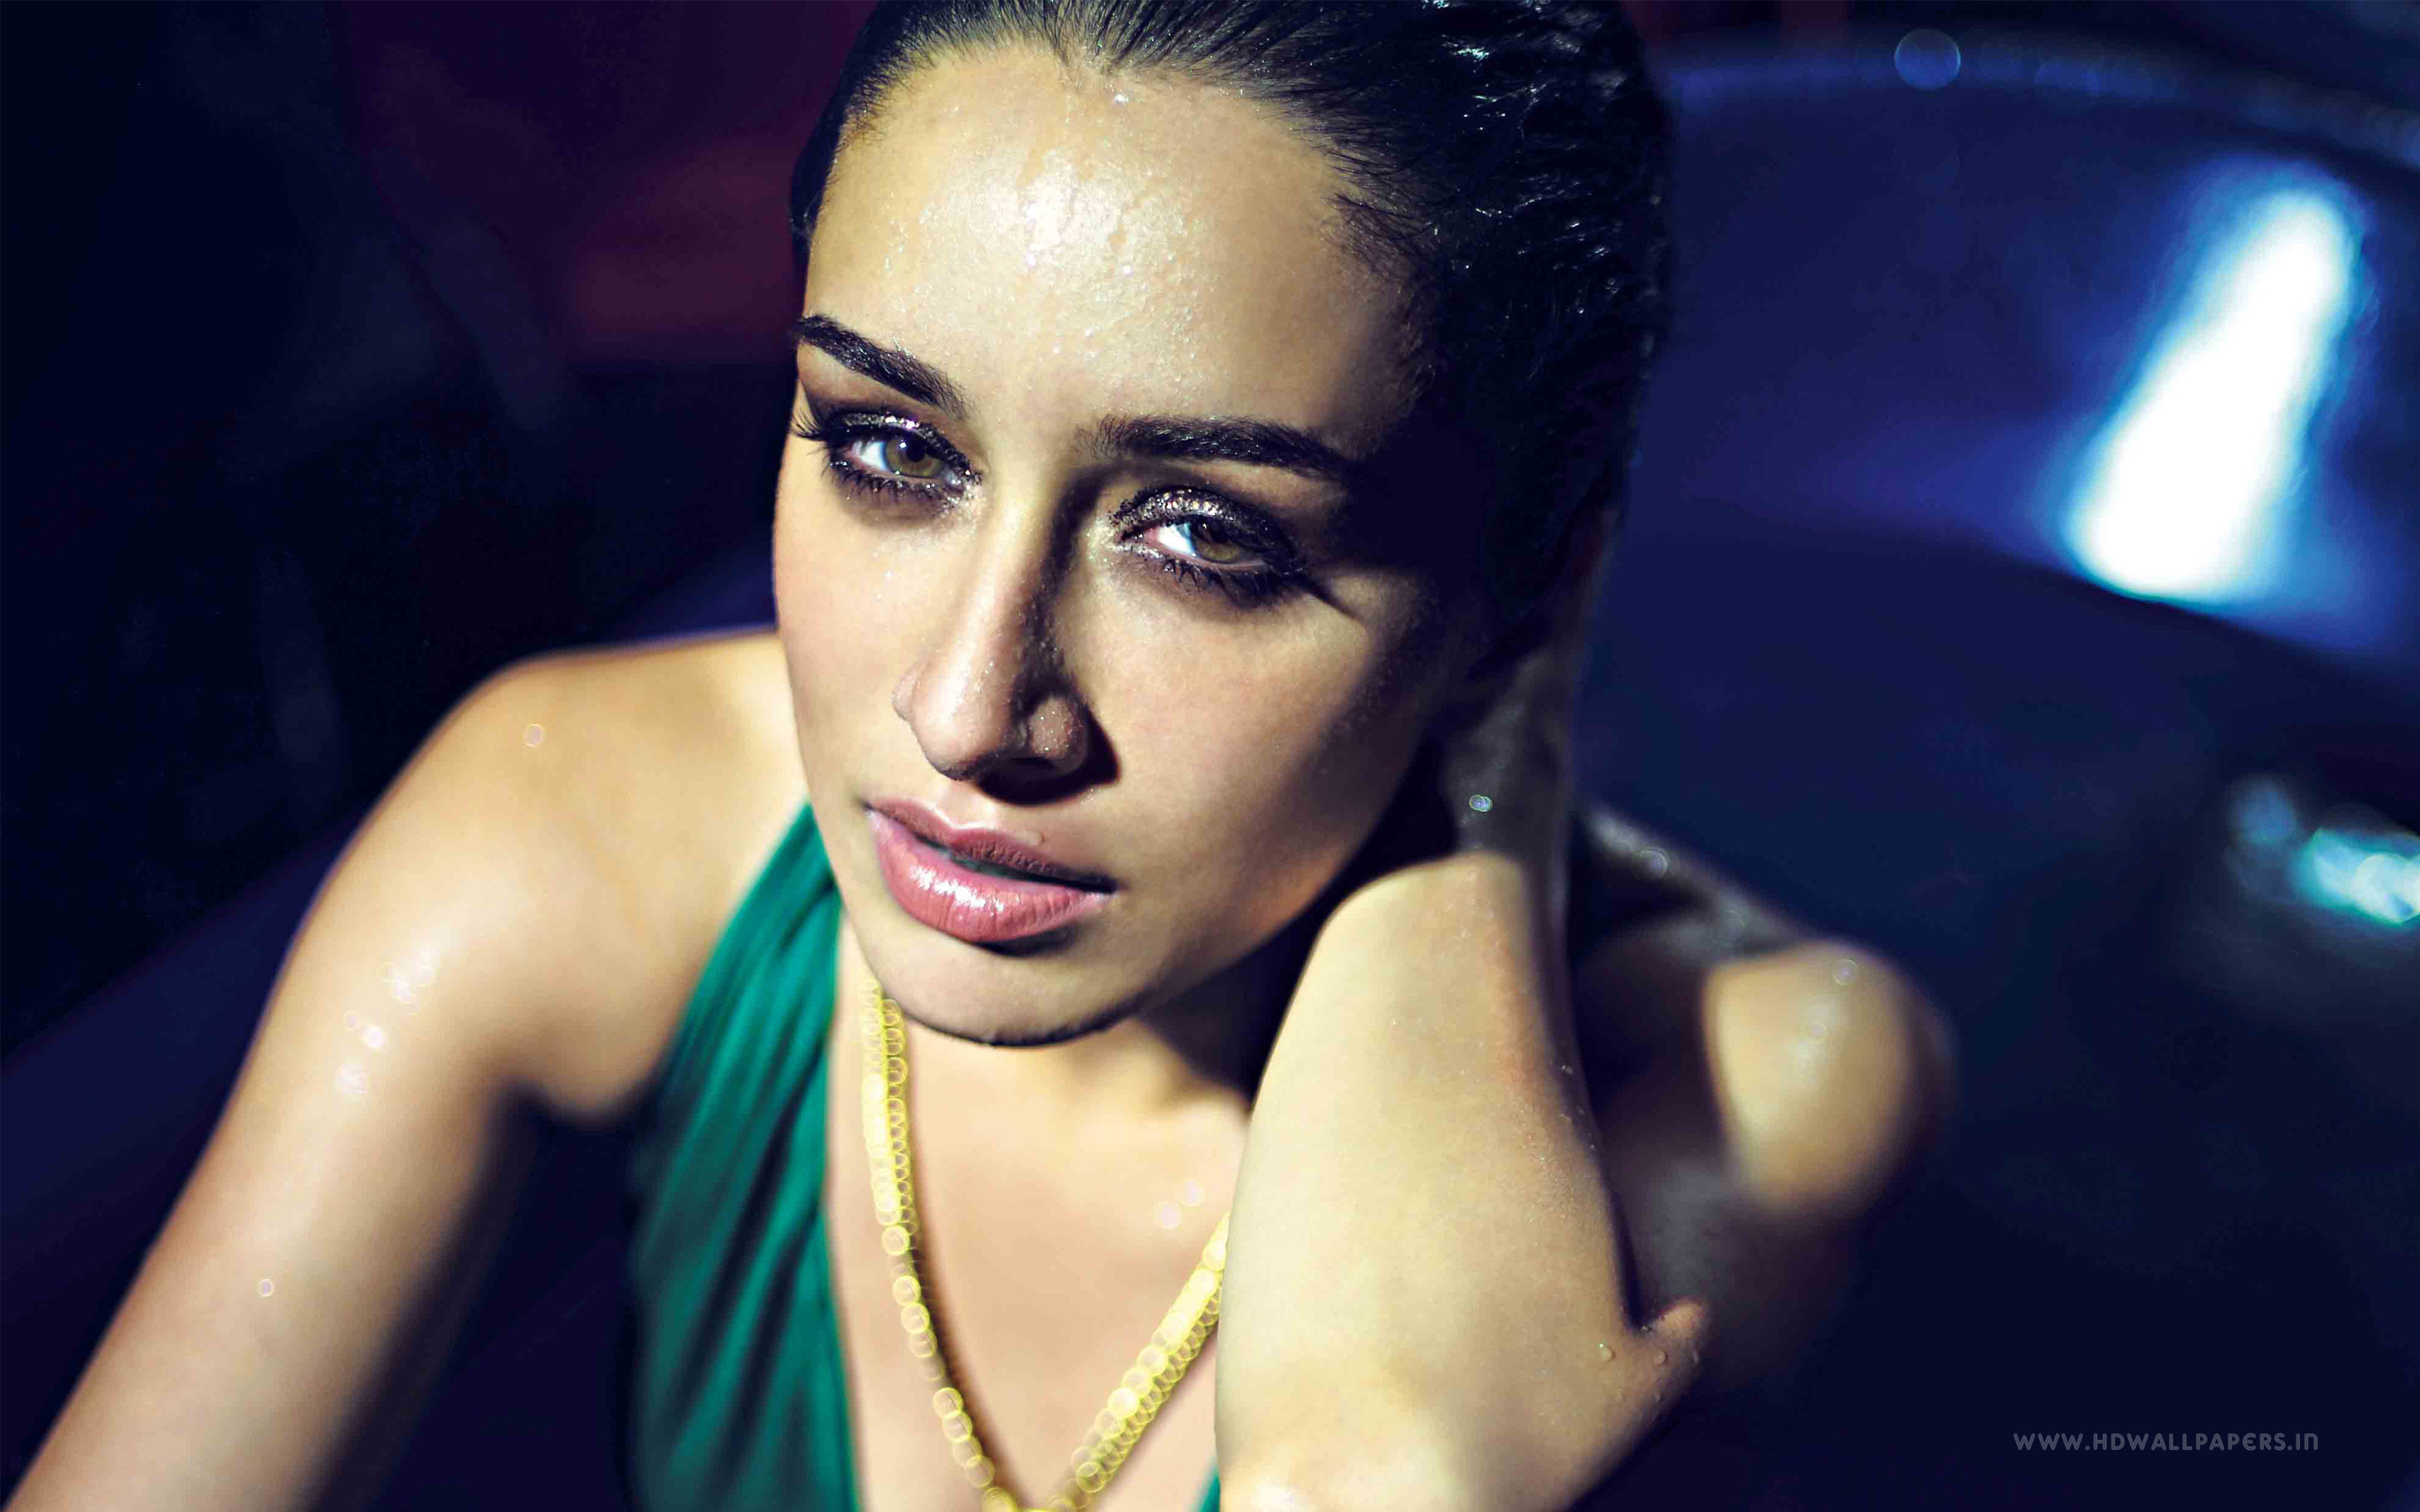 2880x1800 Shraddha Kapoor Full HD Wallpapers Images And Photos Free